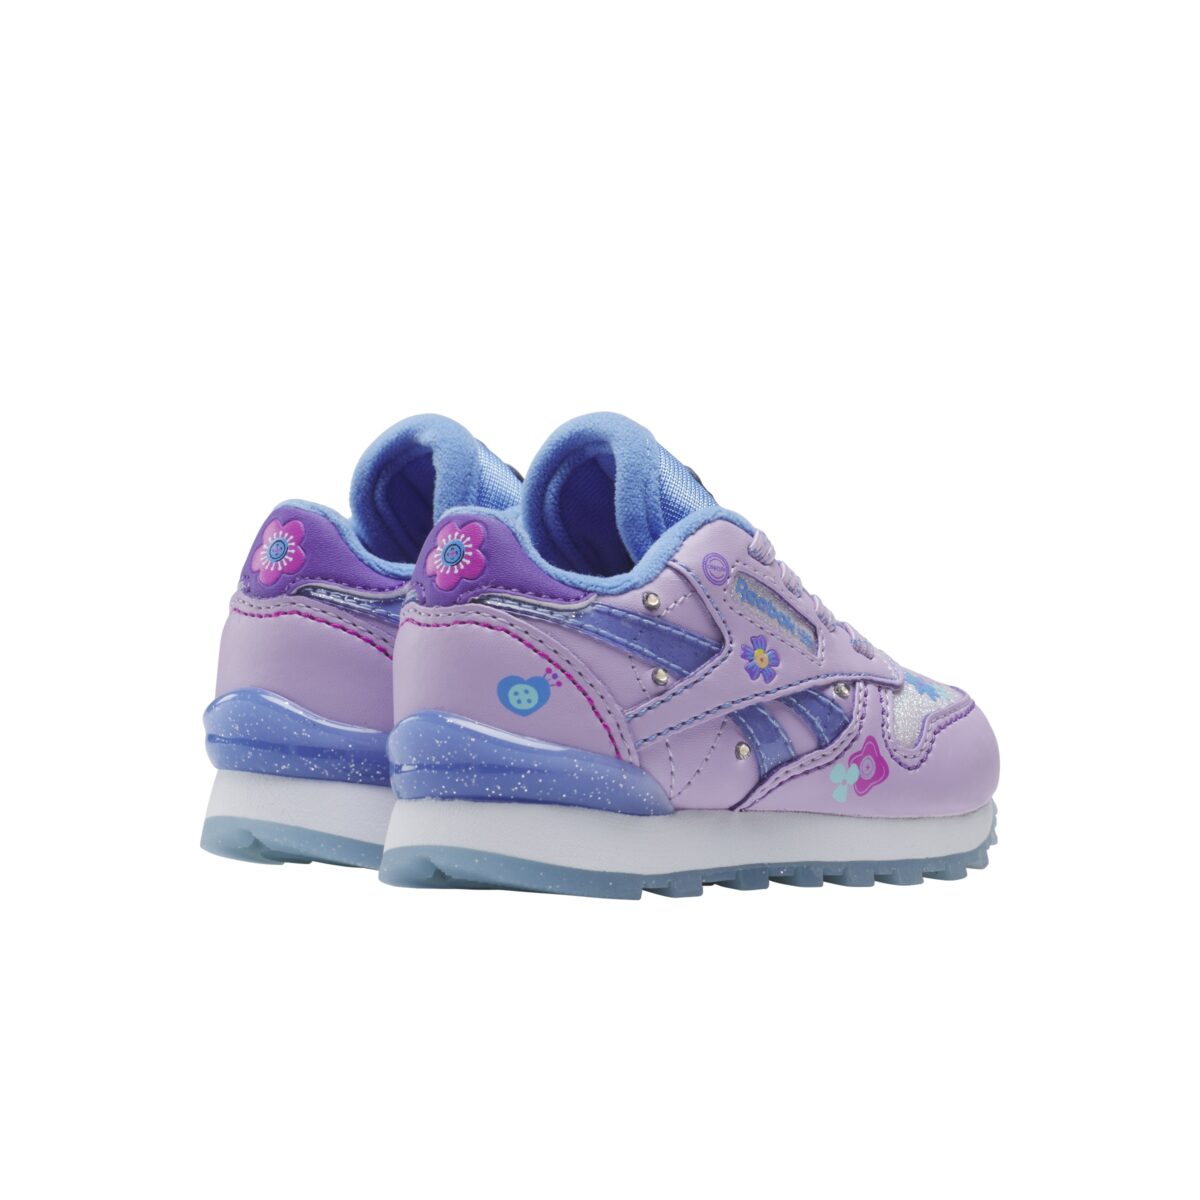 My Little Pony x Reebok Classic Leather Collection